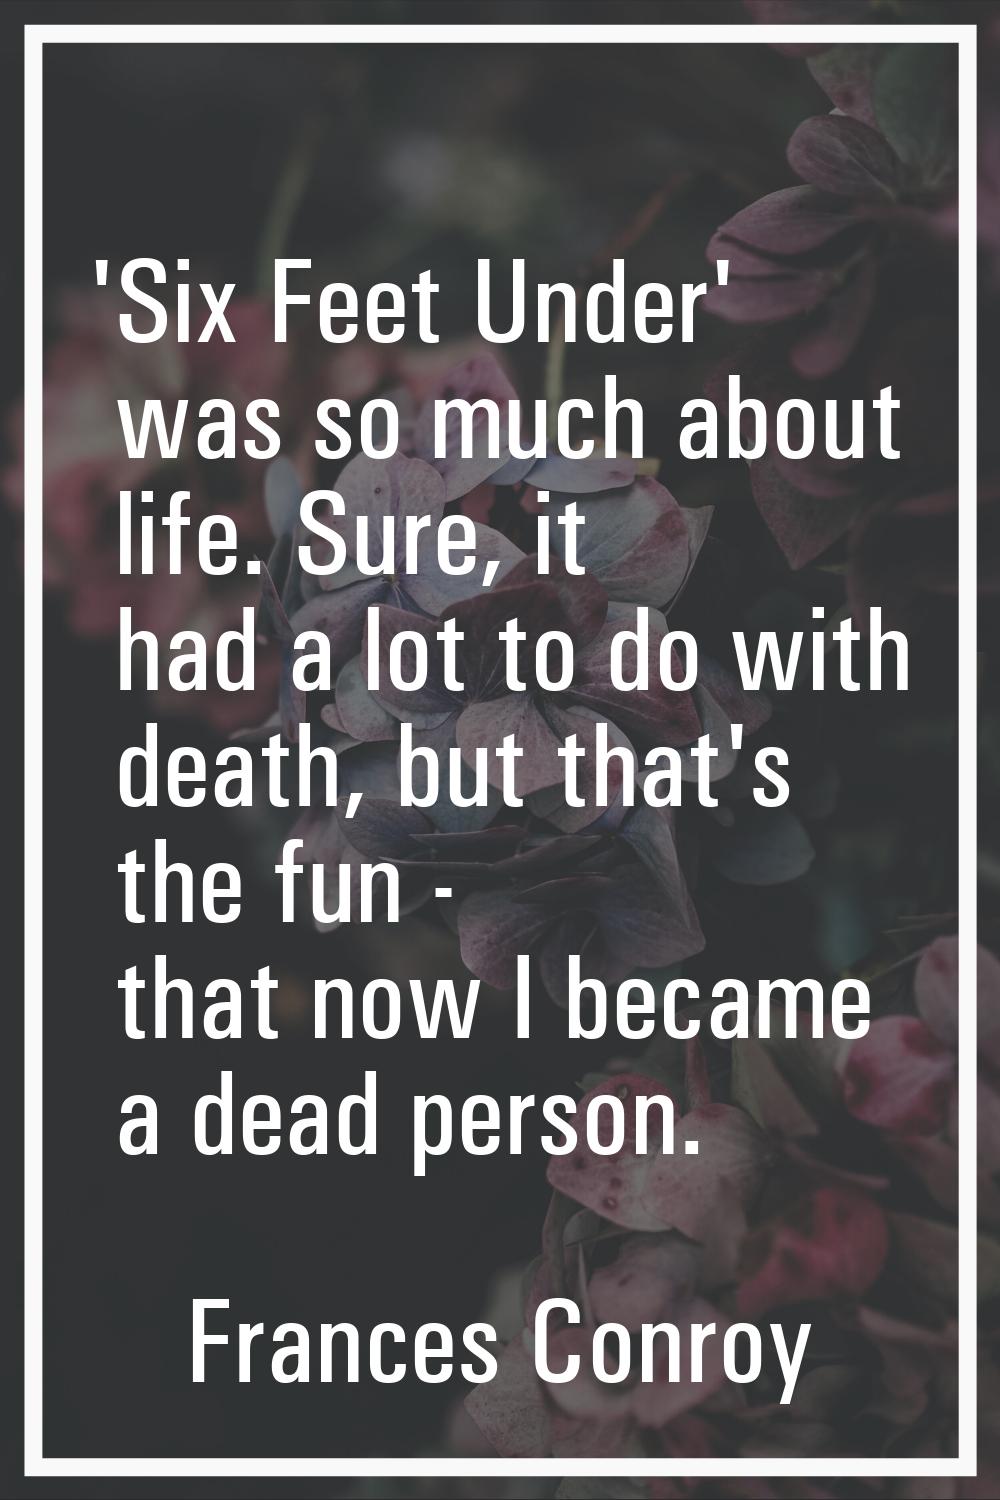 'Six Feet Under' was so much about life. Sure, it had a lot to do with death, but that's the fun - 